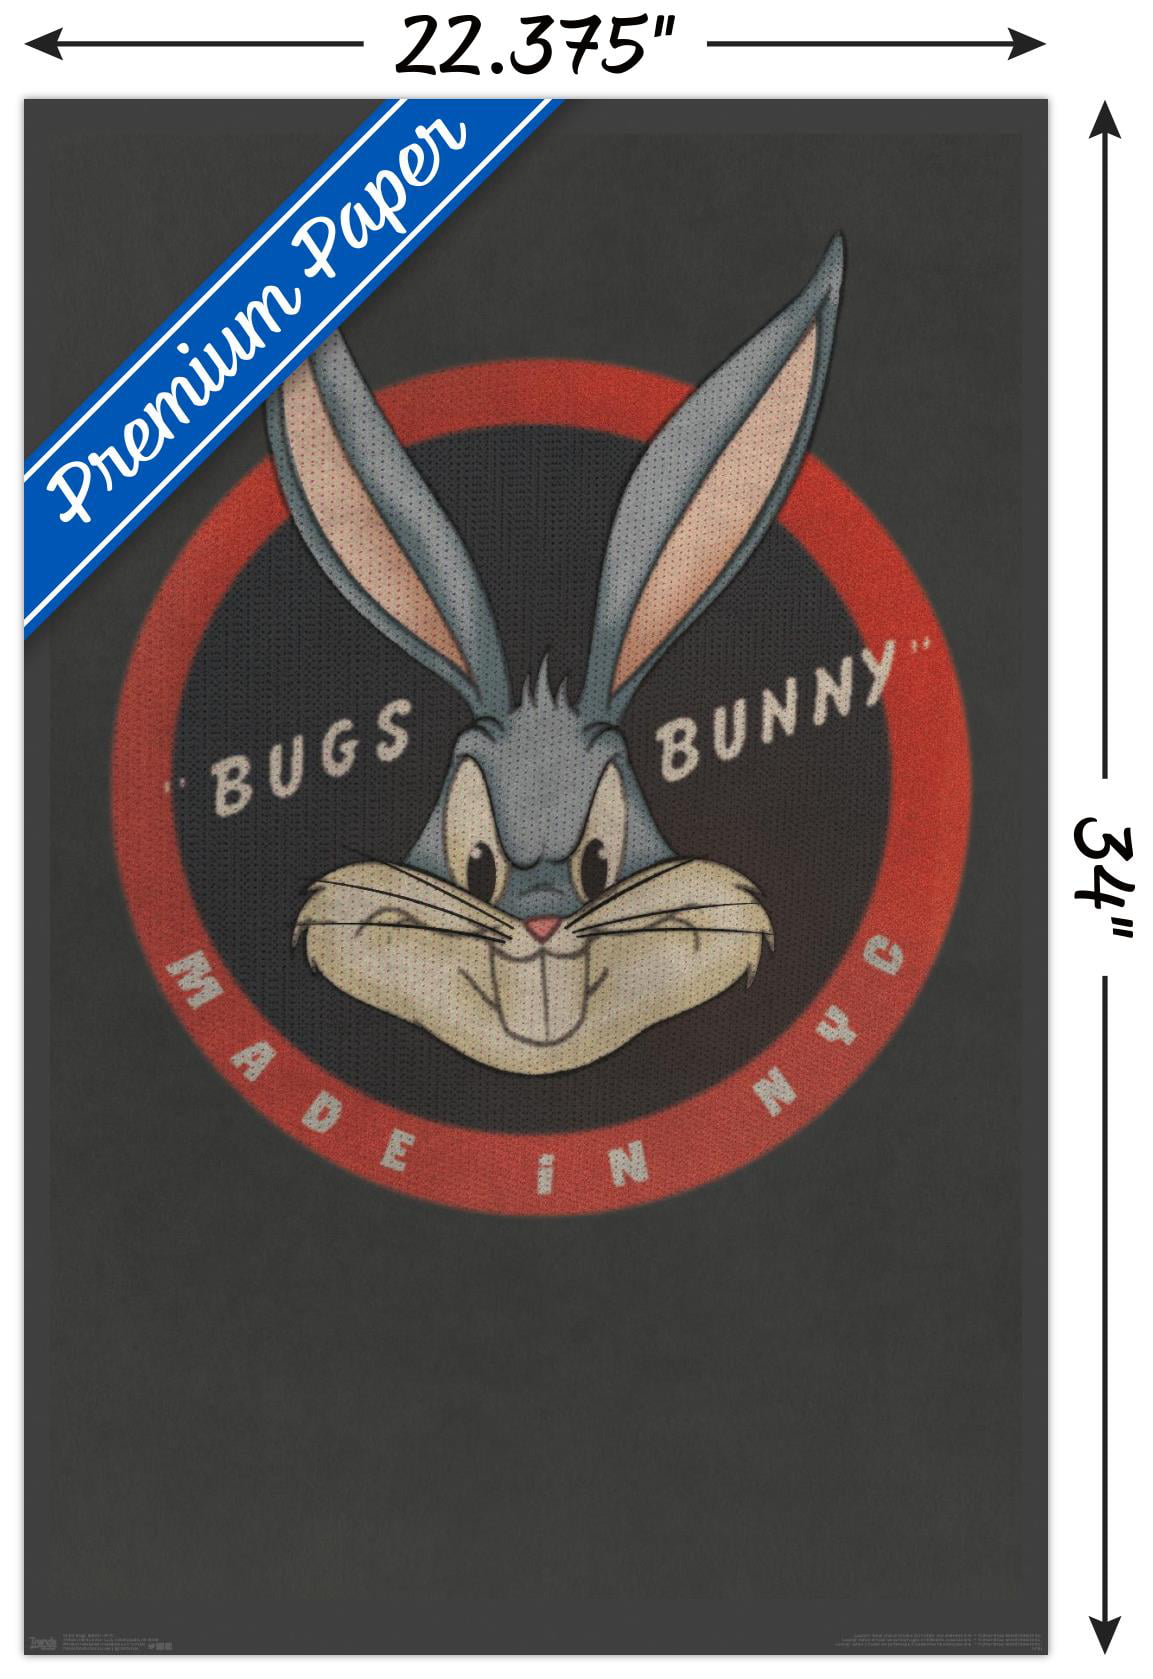 Looney Tunes - Bugs Bunny - NYC Wall Poster, 22.375\